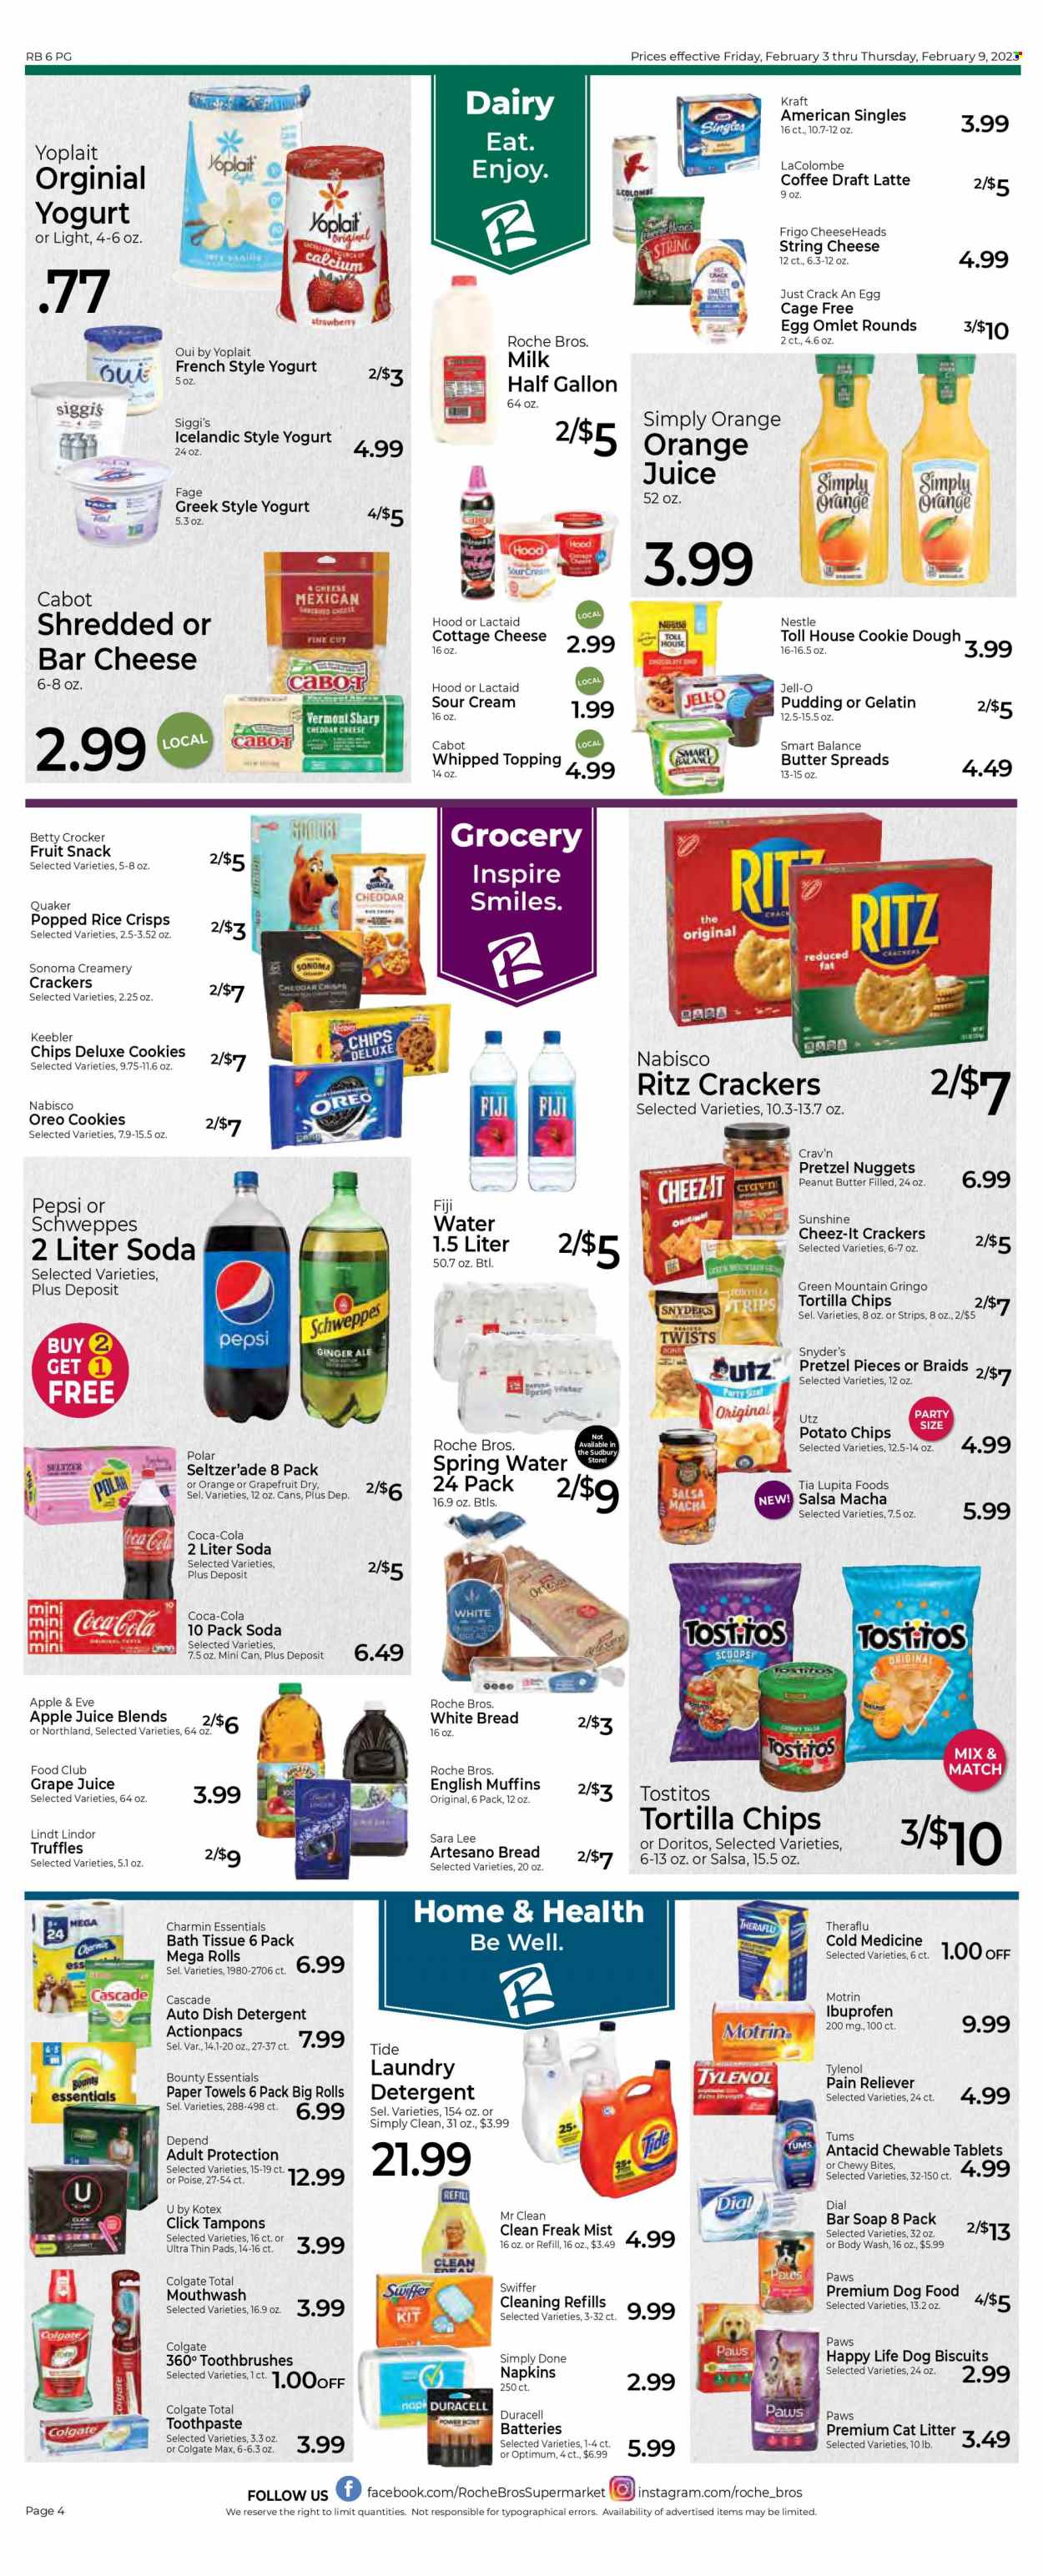 thumbnail - Roche Bros. Flyer - 02/03/2023 - 02/09/2023 - Sales products - bread, english muffins, white bread, pretzels, Sara Lee, grapefruits, nuggets, Quaker, Kraft®, cottage cheese, Lactaid, string cheese, cheese, Kraft Singles, pudding, Oreo, yoghurt, Yoplait, milk, cage free eggs, Sunshine, sour cream, strips, cookies, Nestlé, snack, Lindt, Lindor, Bounty, truffles, crackers, fruit snack, Keebler, RITZ, Doritos, tortilla chips, potato chips, chips, Cheez-It, Tostitos, rice crisps, topping, Jell-O, salsa, peanut butter, apple juice, Coca-Cola, ginger ale, Schweppes, Pepsi, orange juice, juice, seltzer water, spring water, soda, coffee, Green Mountain, napkins, bath tissue, kitchen towels, paper towels, Charmin, detergent, Swiffer, Cascade, Tide, laundry detergent, dishwasher cleaner, body wash, soap bar, Dial, soap, Colgate, toothpaste, mouthwash, Kotex, tampons, battery, Duracell, animal food, cat litter, Paws, animal treats, dog food, dog biscuits, Optimum, calcium, Theraflu, Tylenol, Ibuprofen, Antacid, Motrin. Page 4.